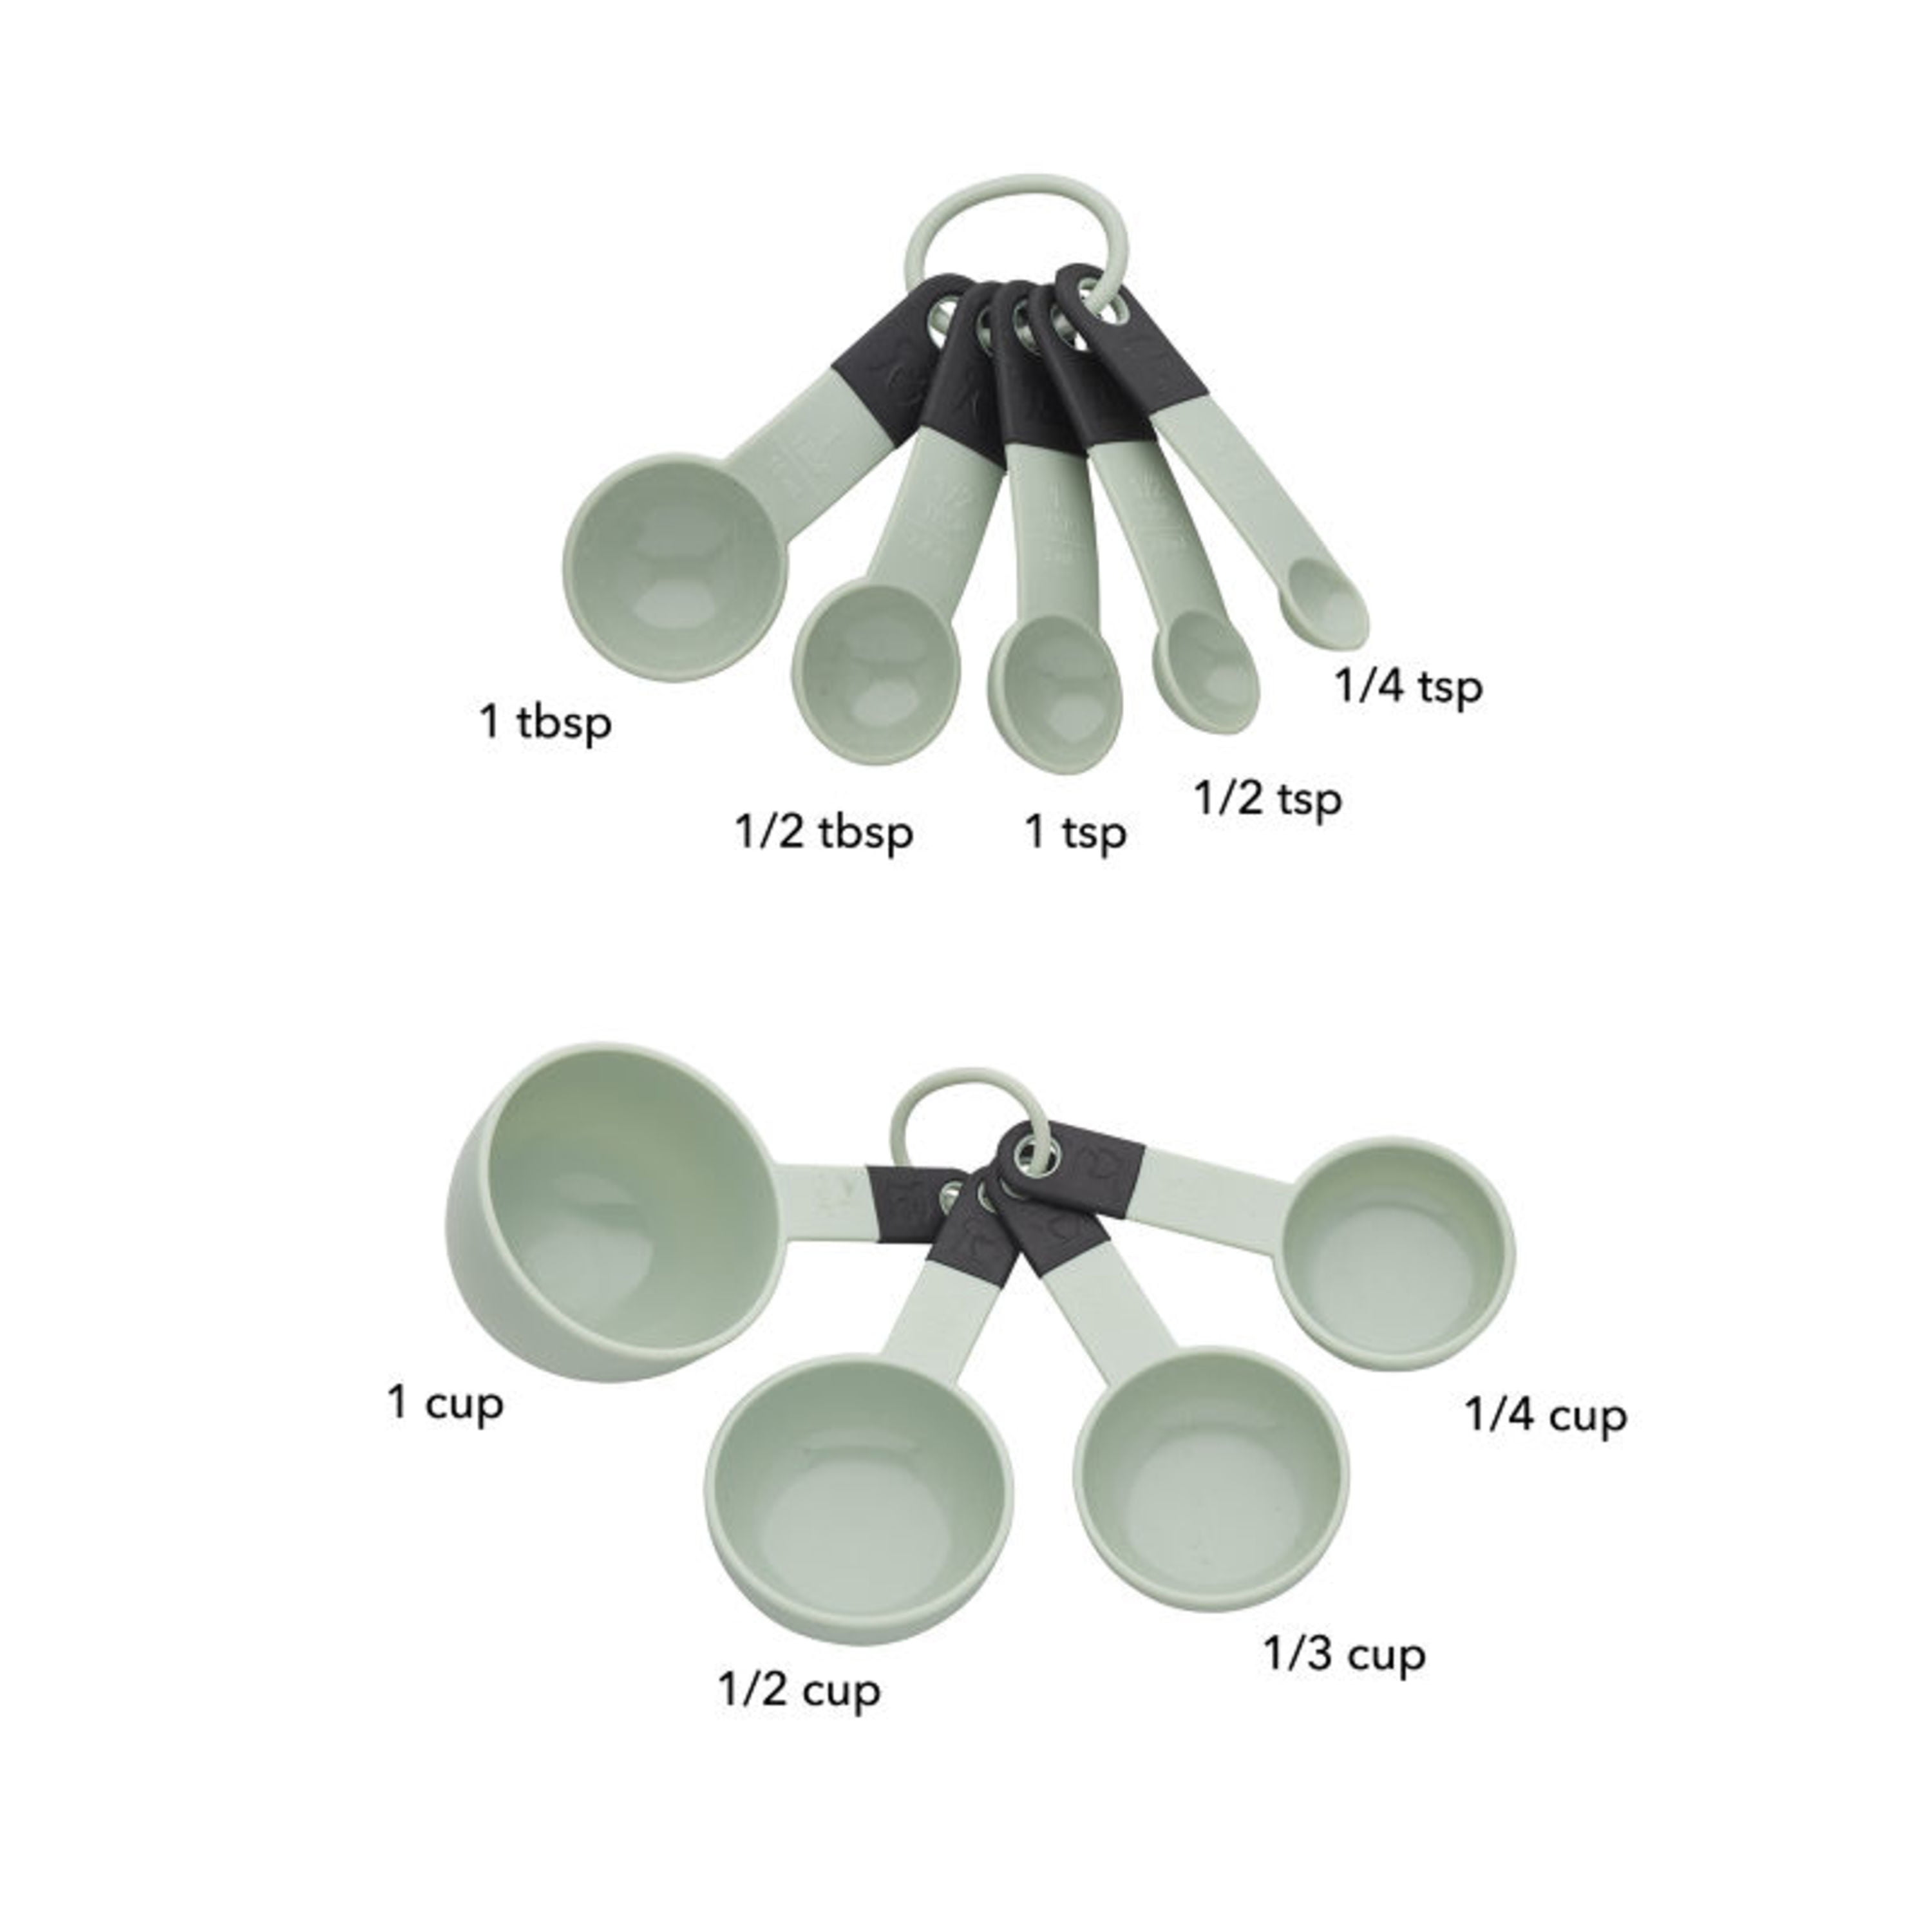 Kitchenaid 9-piece BPA-Free Plastic Measuring Cups and Spoons Set in  Pistachio 